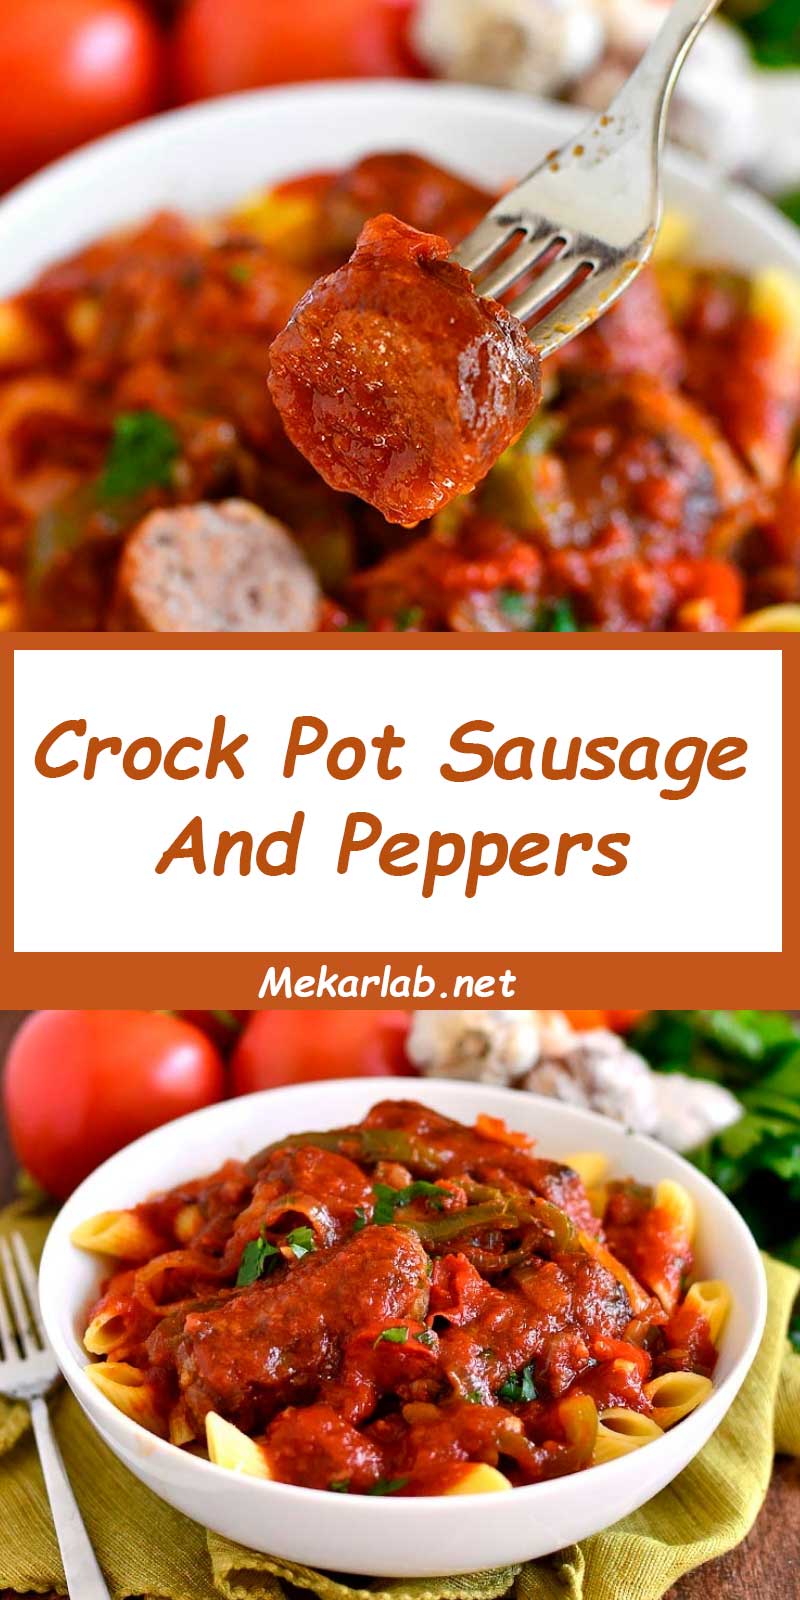 Crock Pot Sausage And Peppers – Mekarlab.net